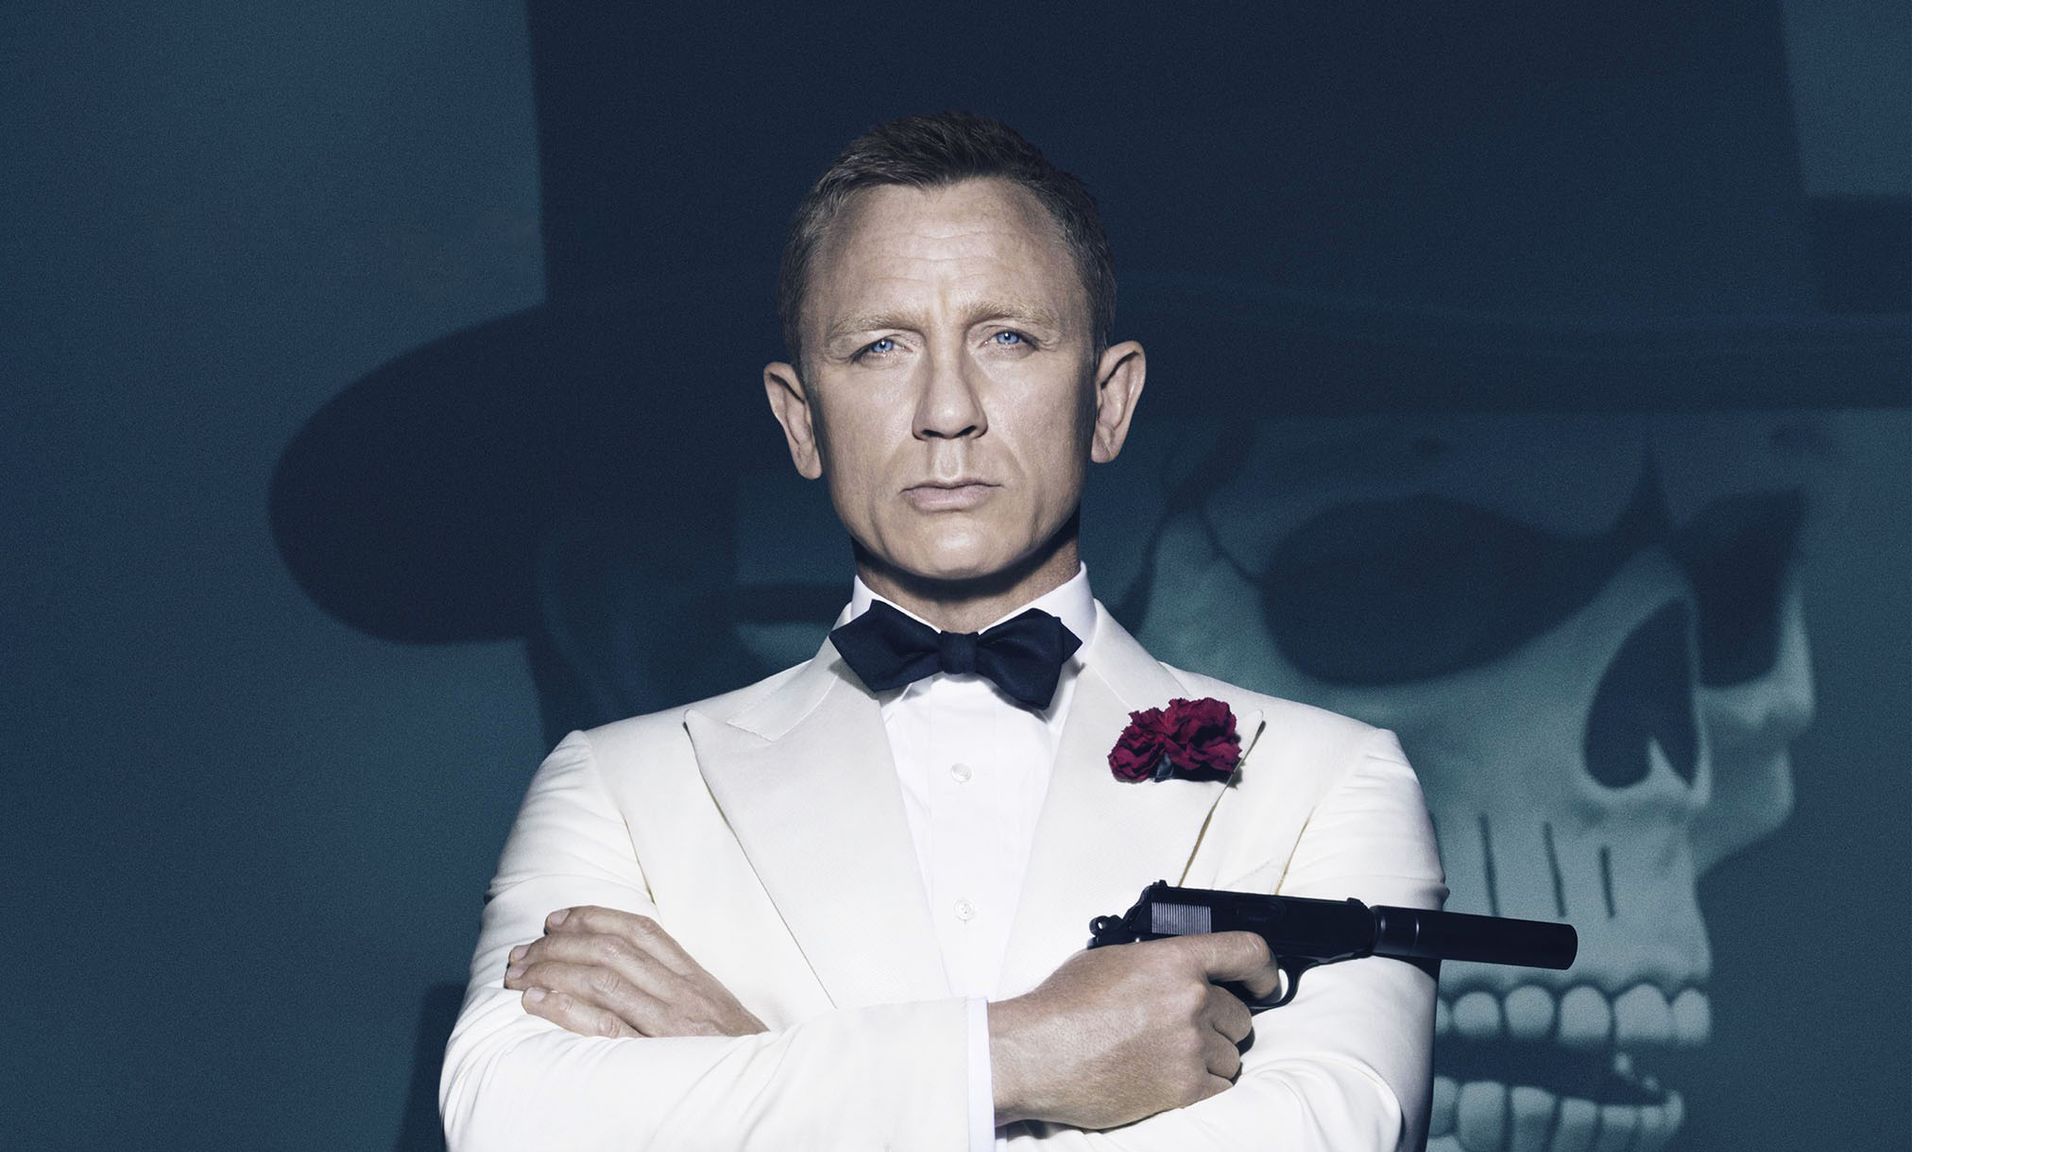 James Bond: No Time To Die revealed as title of next 007 film | Ents ...